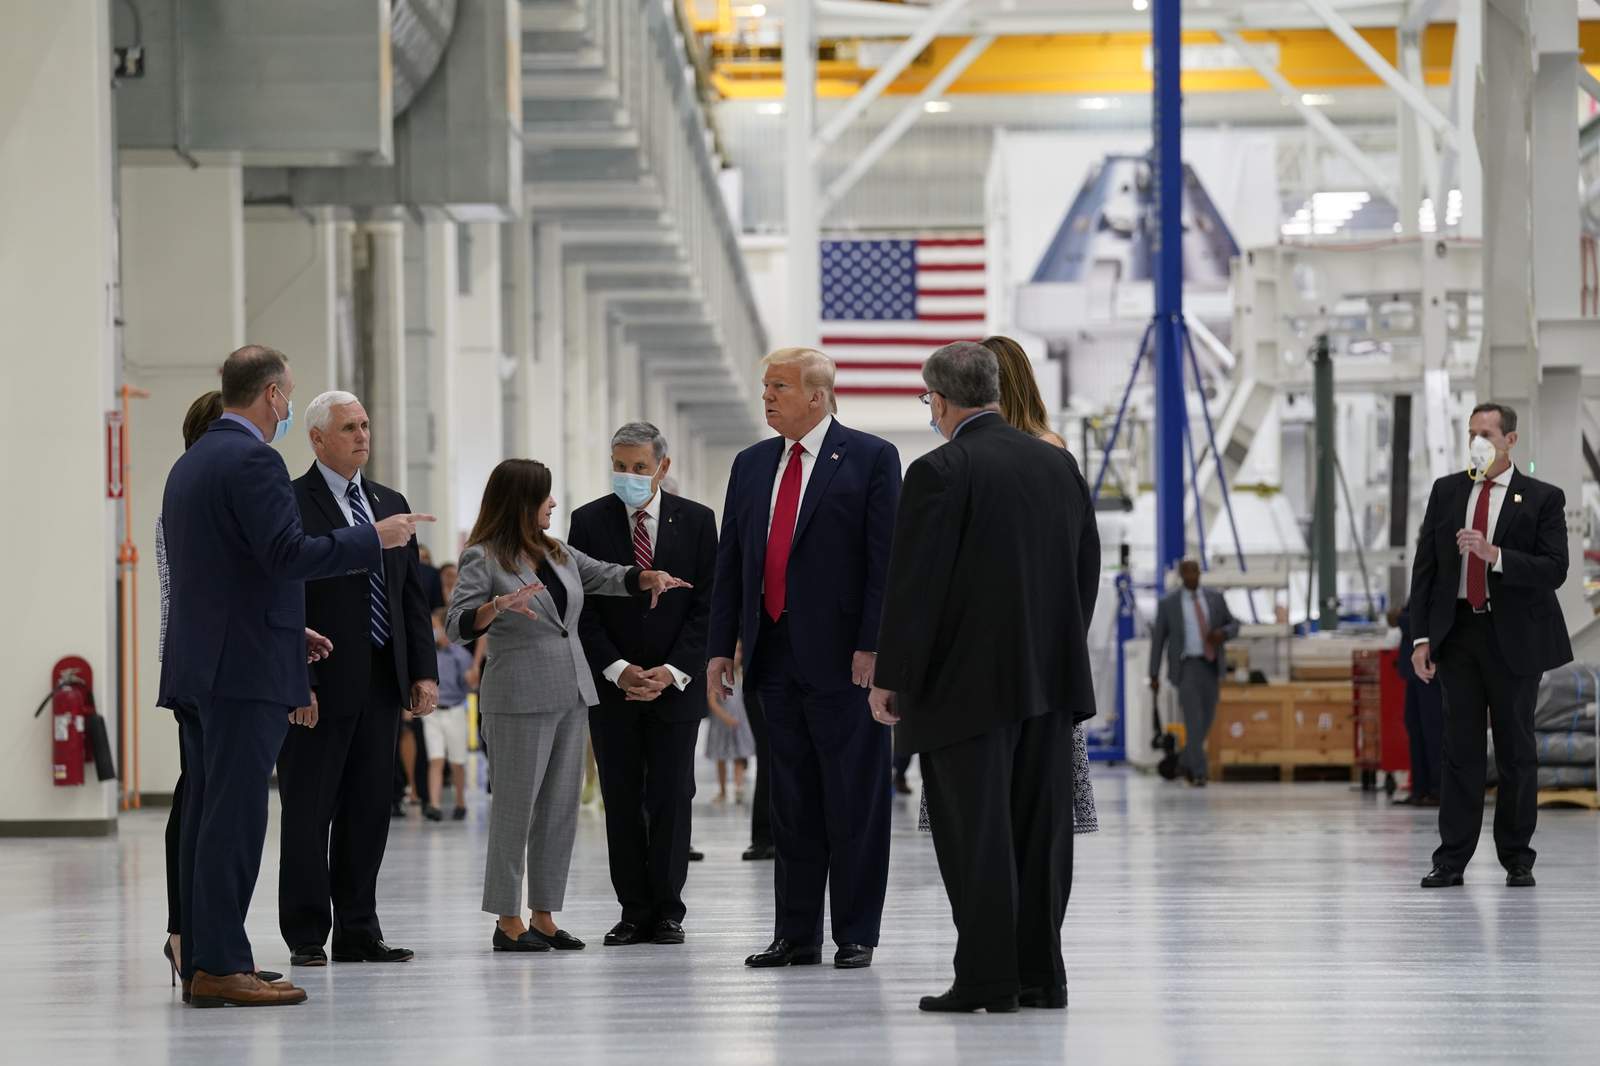 President Trump will attend next SpaceX launch attempt at Kennedy Space Center